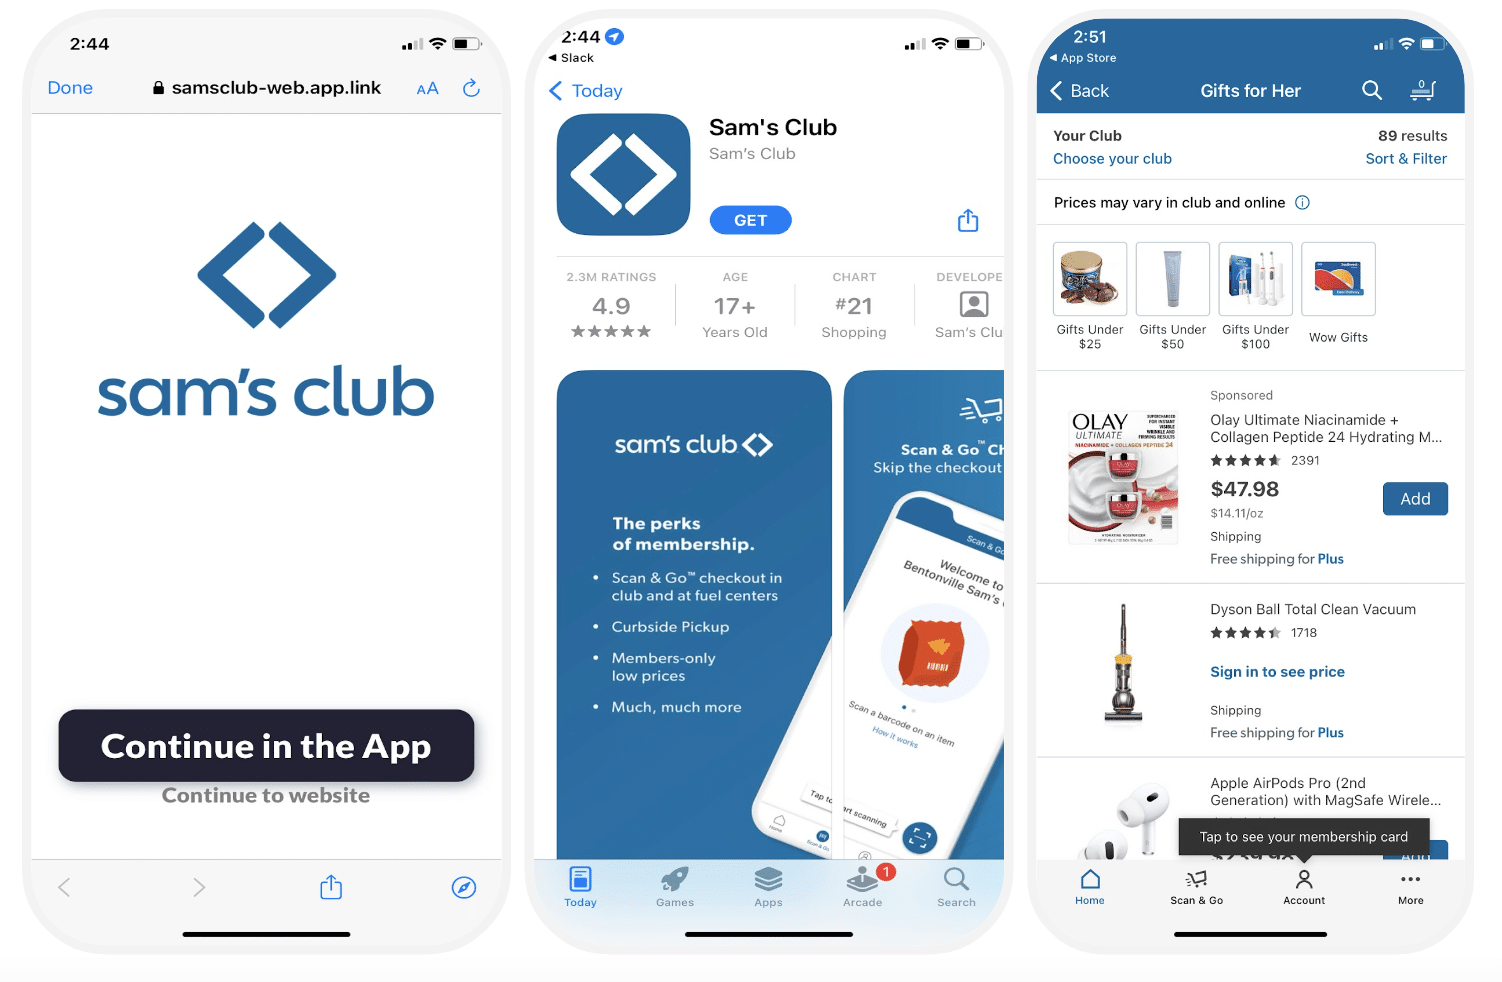 Three images showing the progression of a Sam's Club user from the mobile web to the app. Users are shown a branded transition page when deep linked to in-app content.